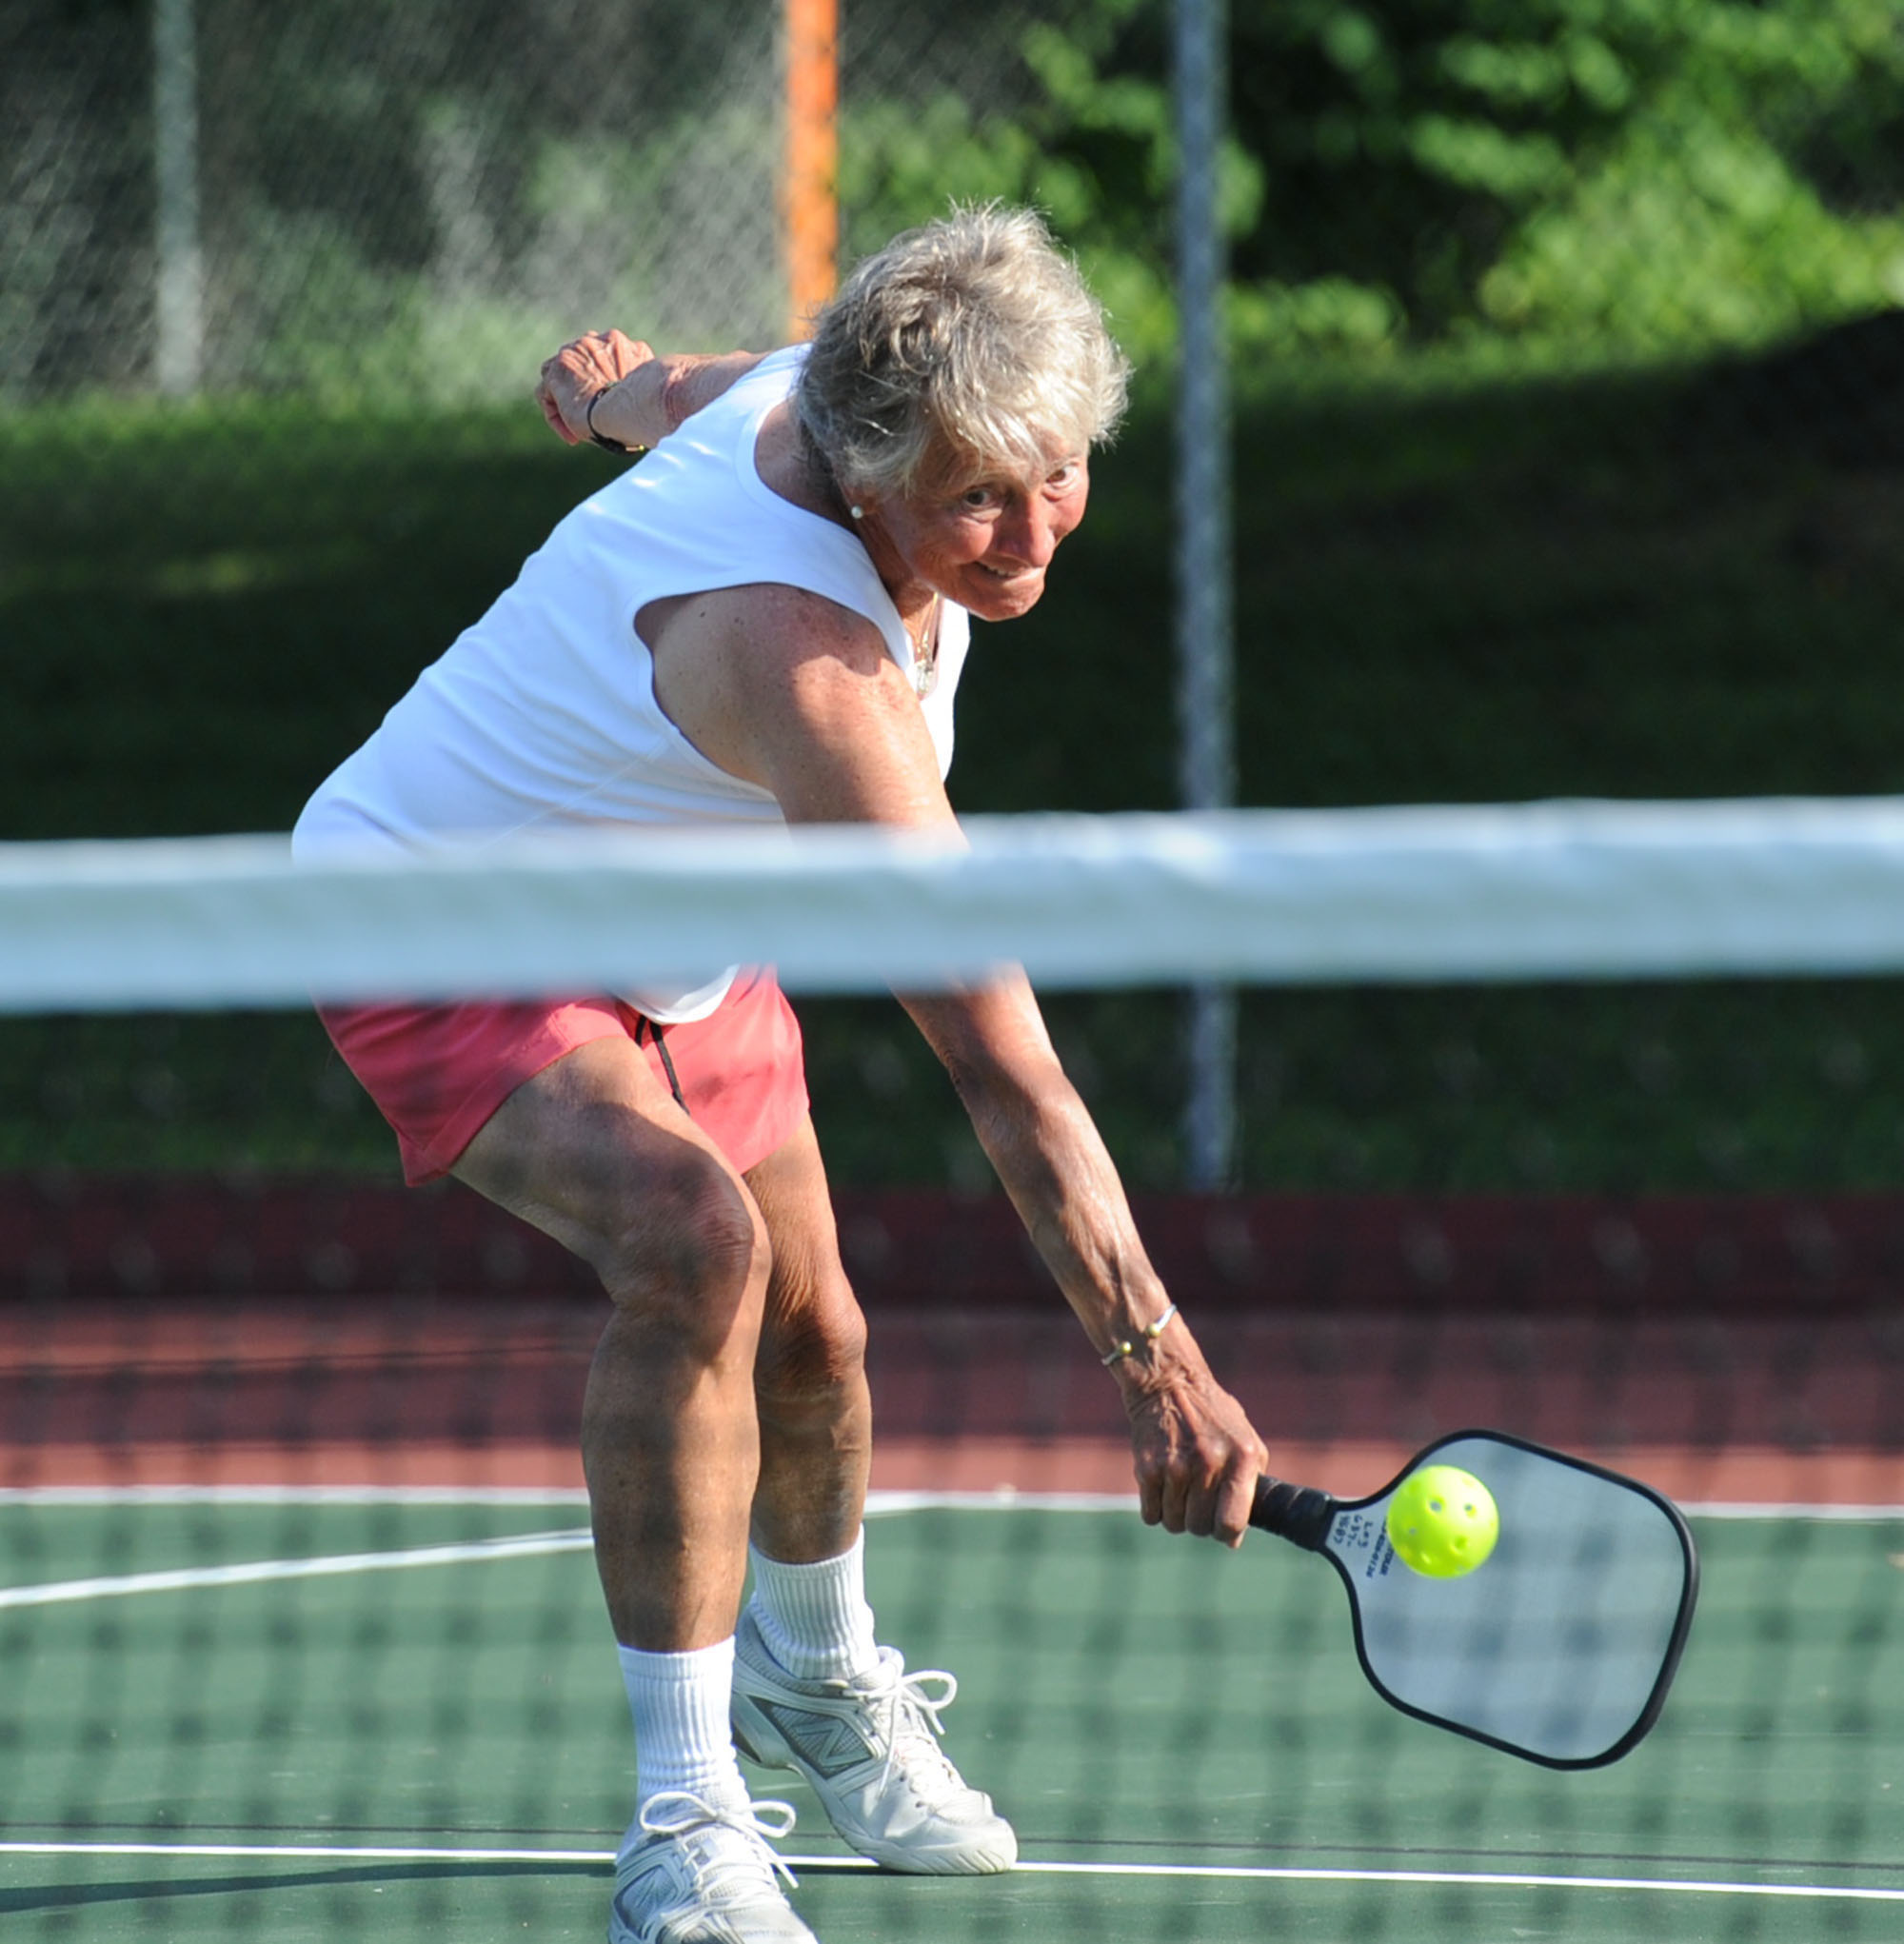 New courts open time to #39 Play pickleball #39 GreenwichTime